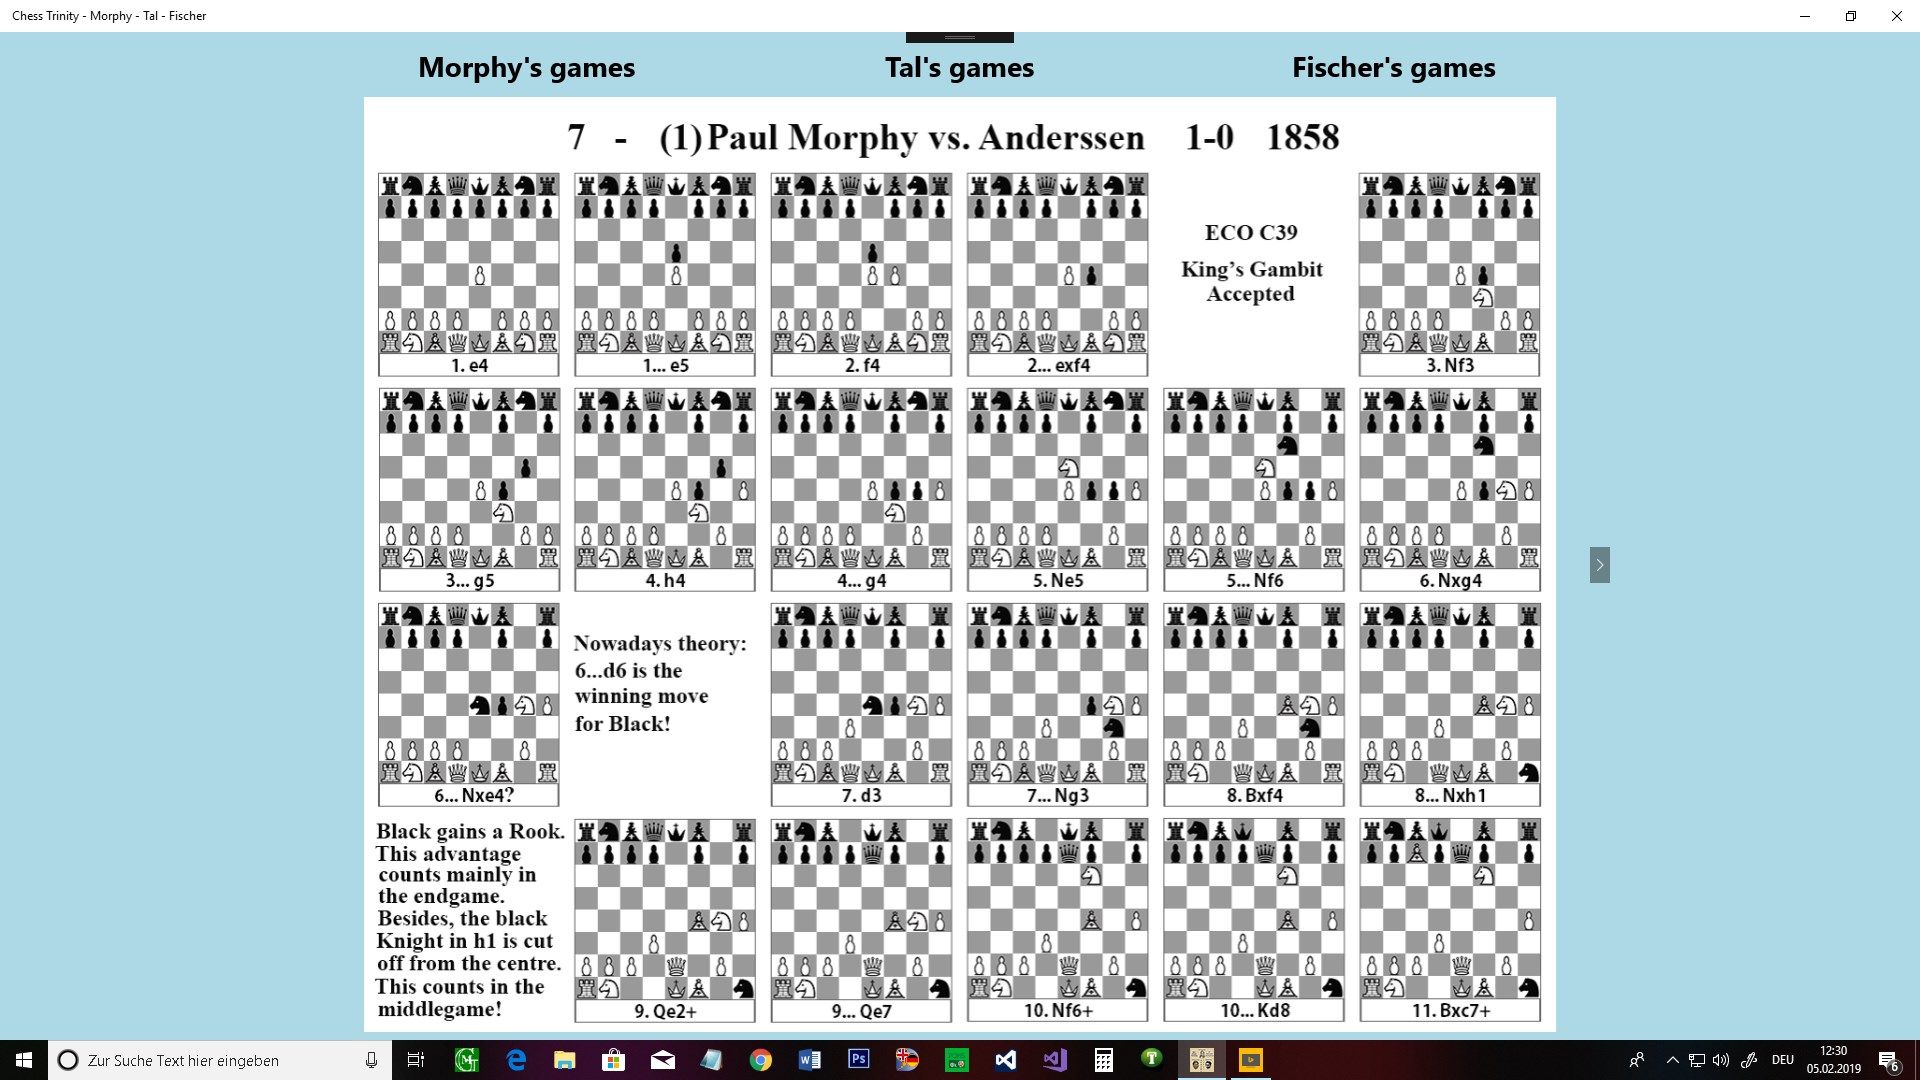 Notes of the first game Morphy vs. Anderssen.